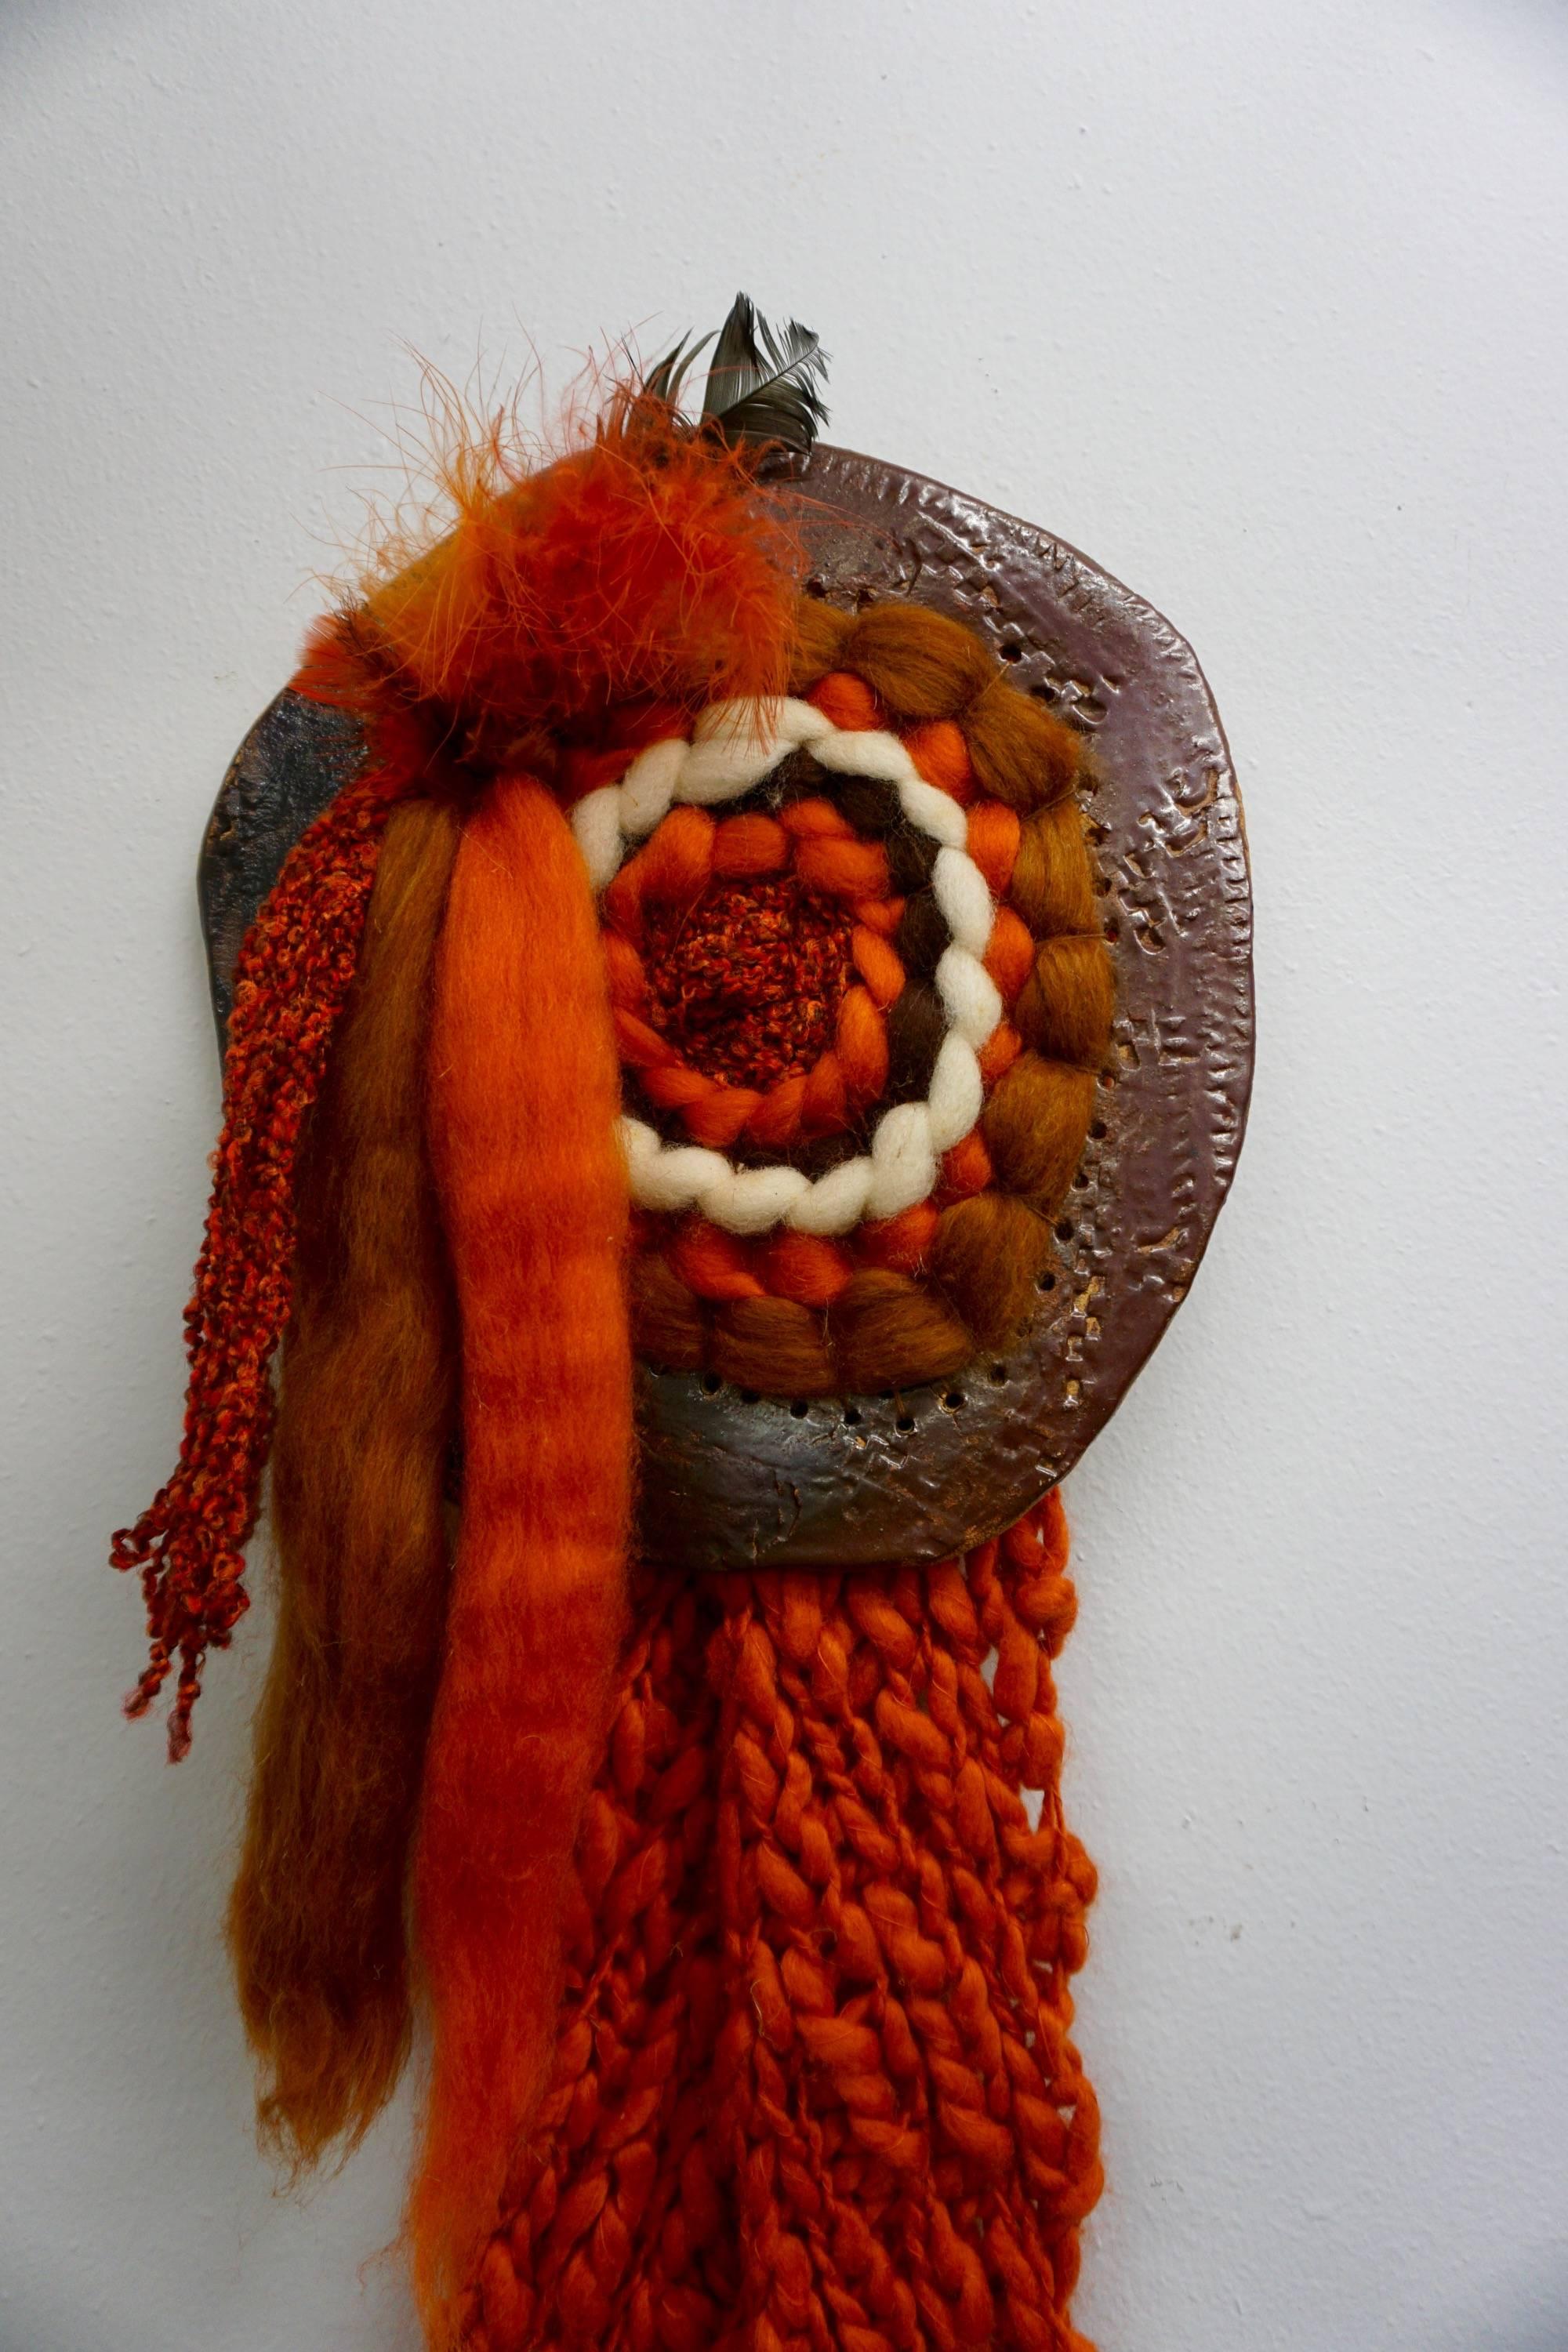 Organic weaving mounted on a hand thrown ceramic disc. Bright orange wool, tufted wool and feathers.